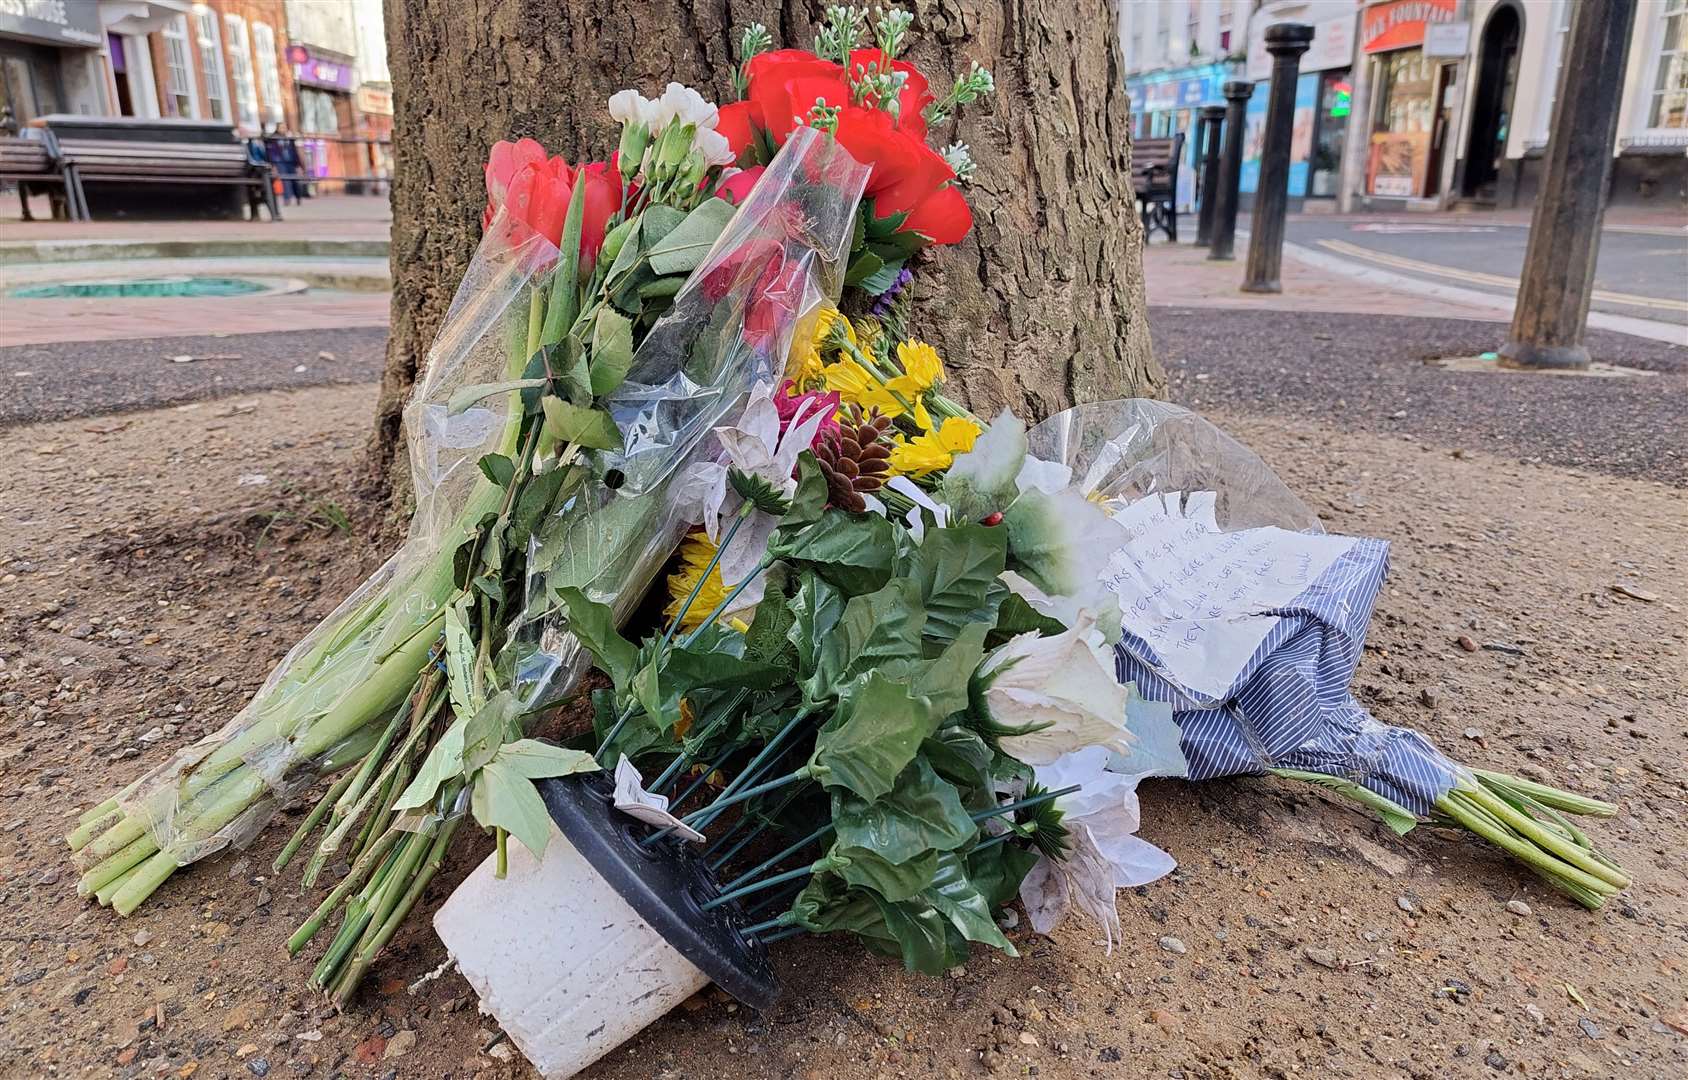 Floral tributes have been left under a tree in the Lower High Street